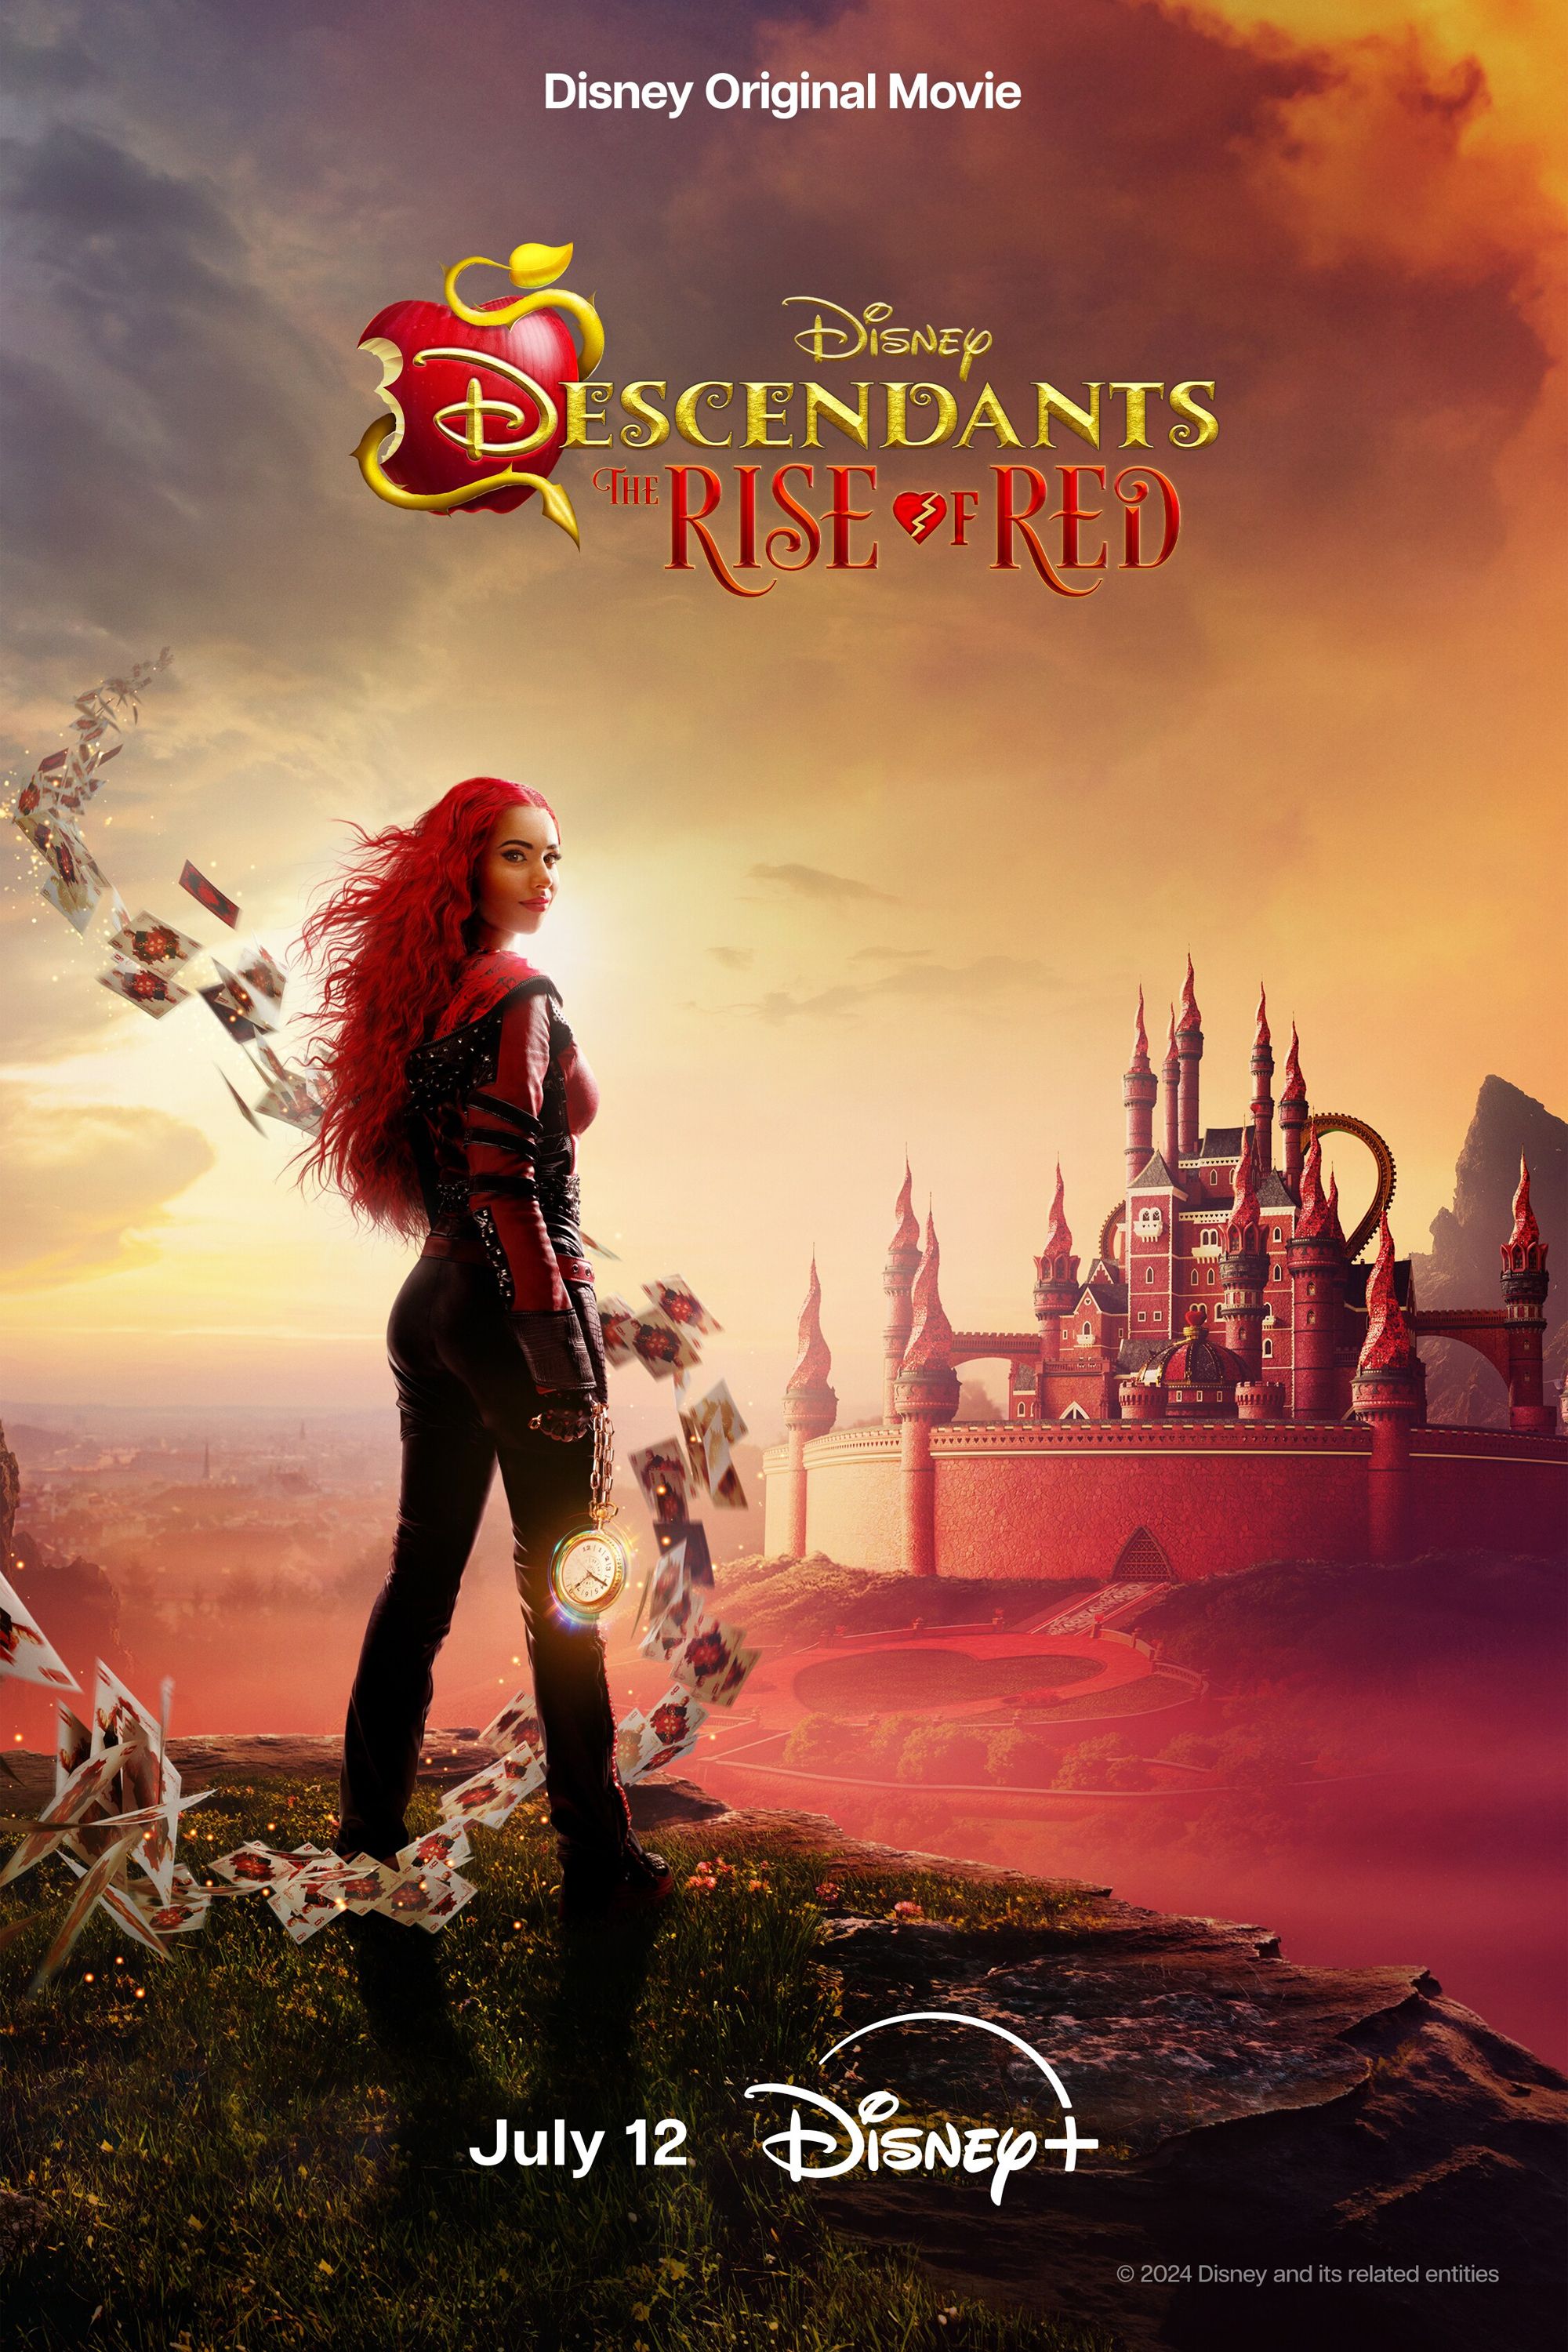 Descendants The Rise of Red Poster Showing a Woman with Red Hair Standing in Front of a Castle as Cards Fly Around Her